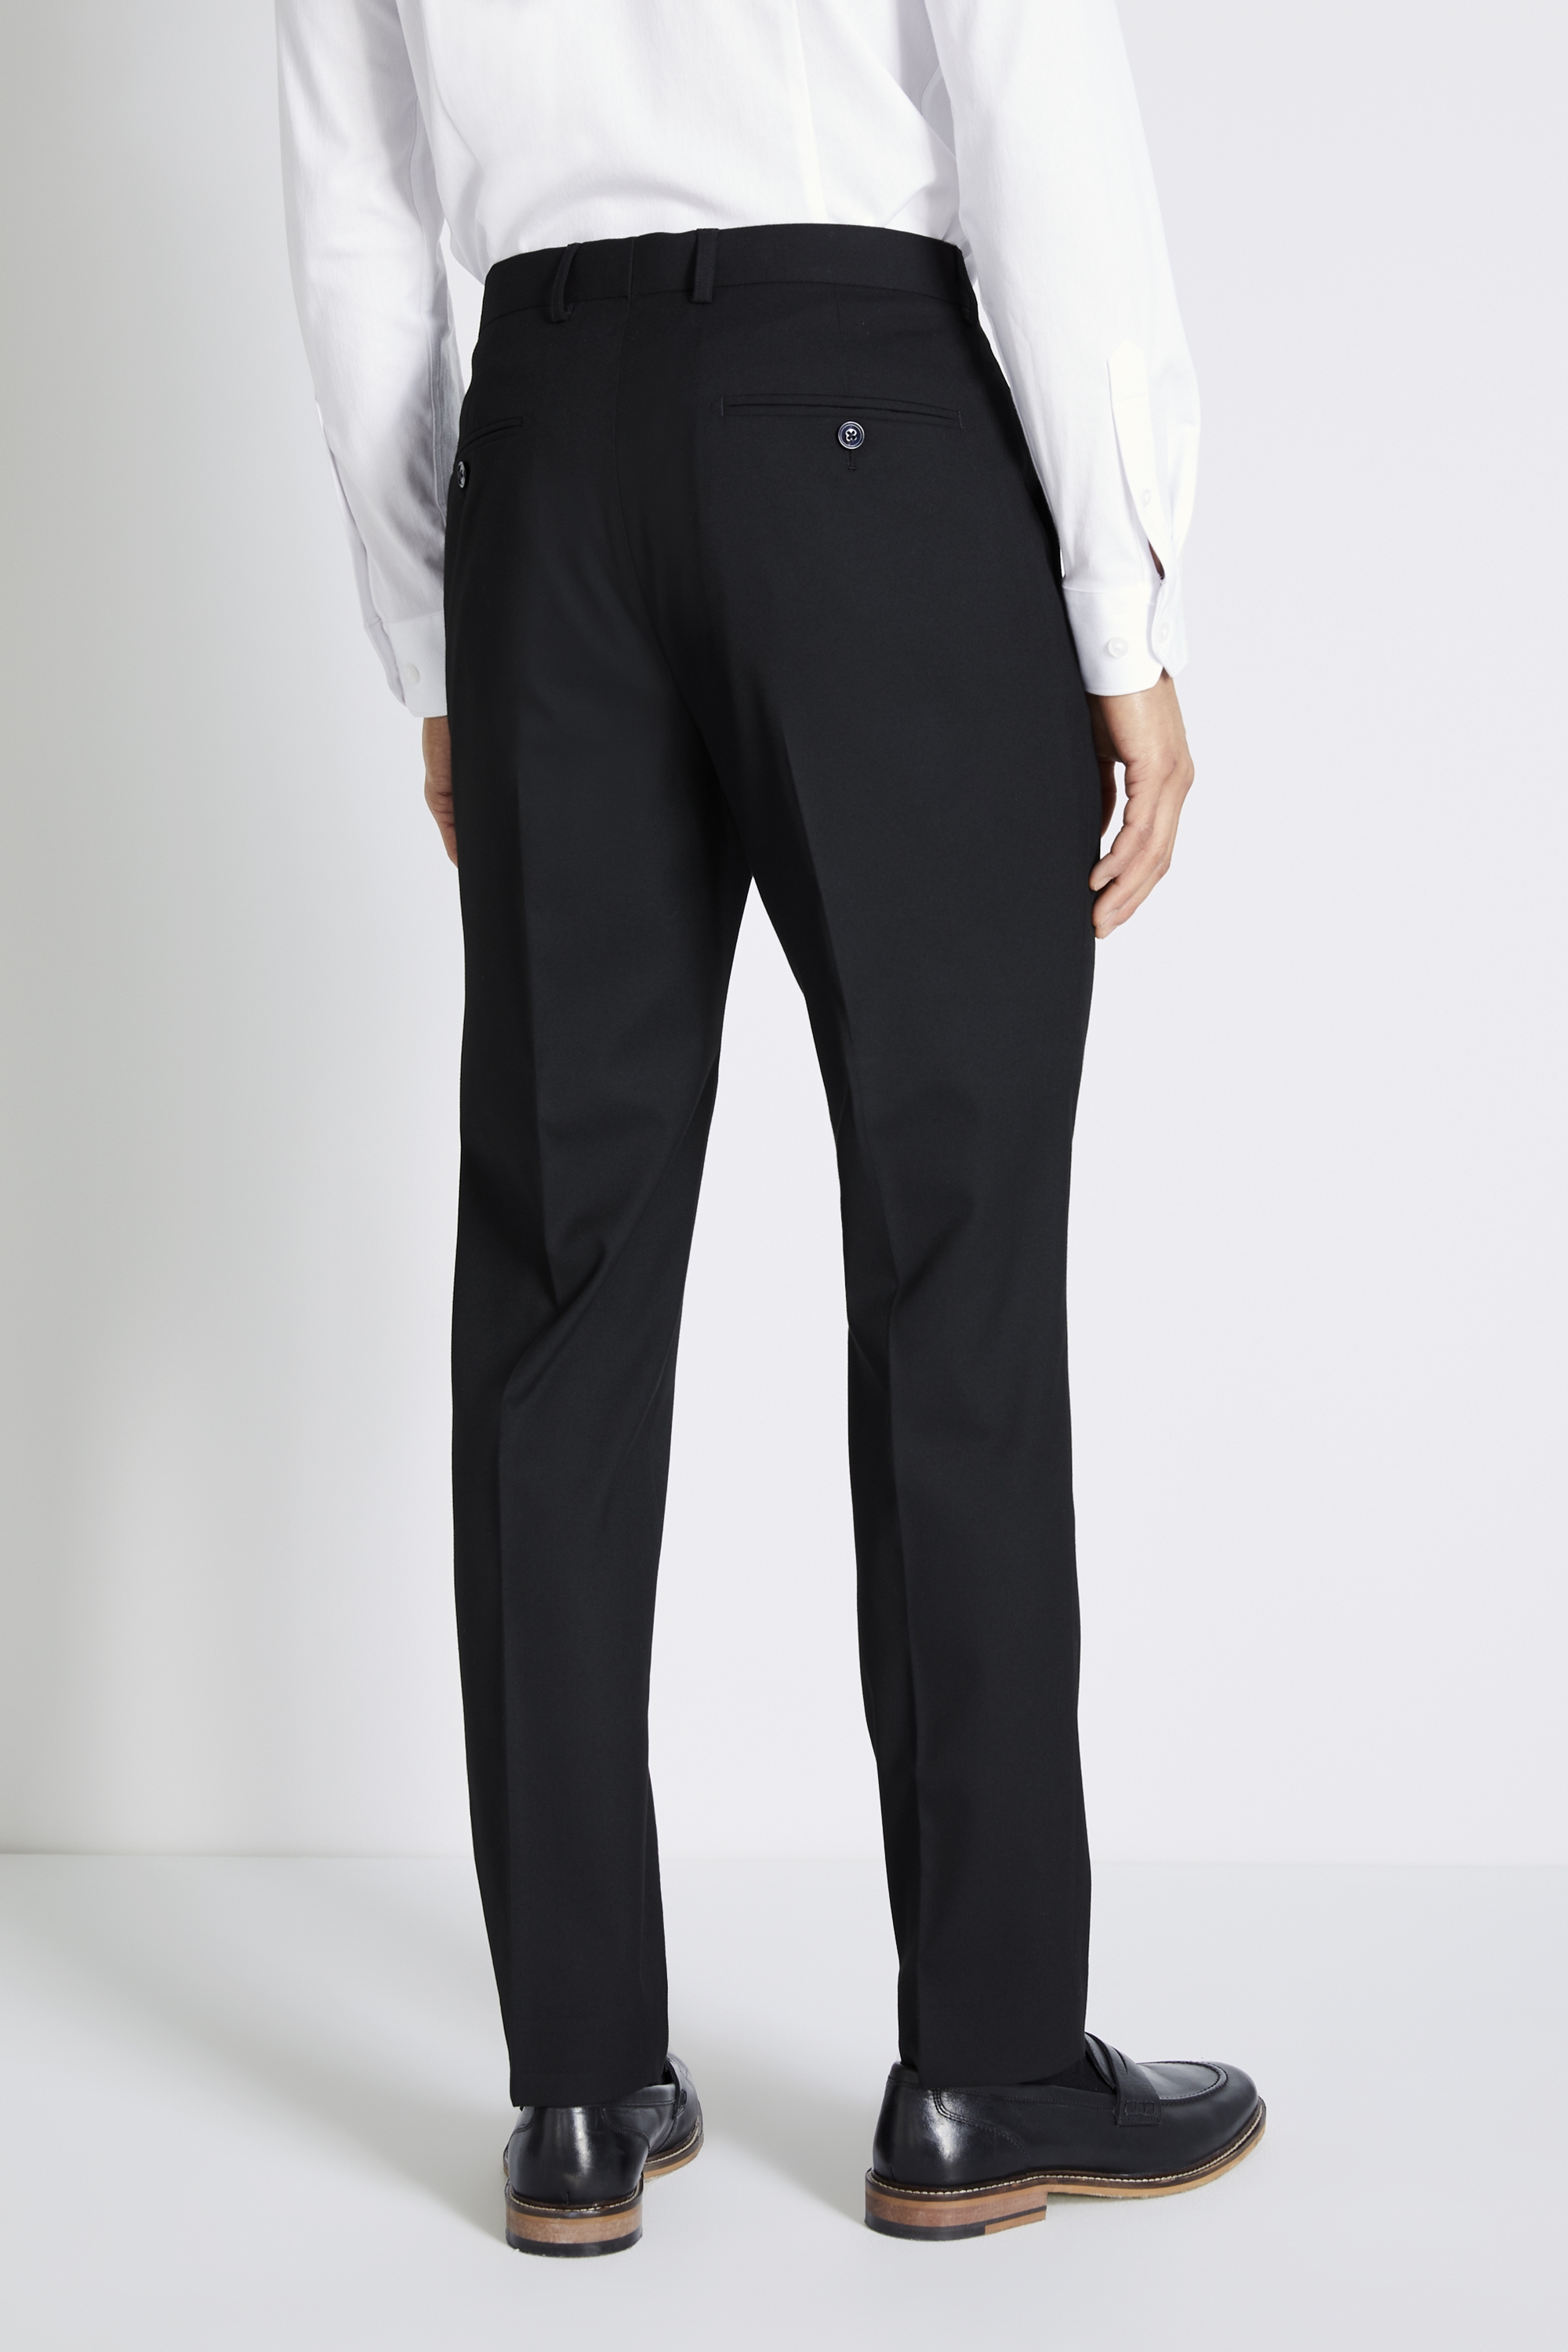 Slim Fit Black Trousers | Buy Online at Moss